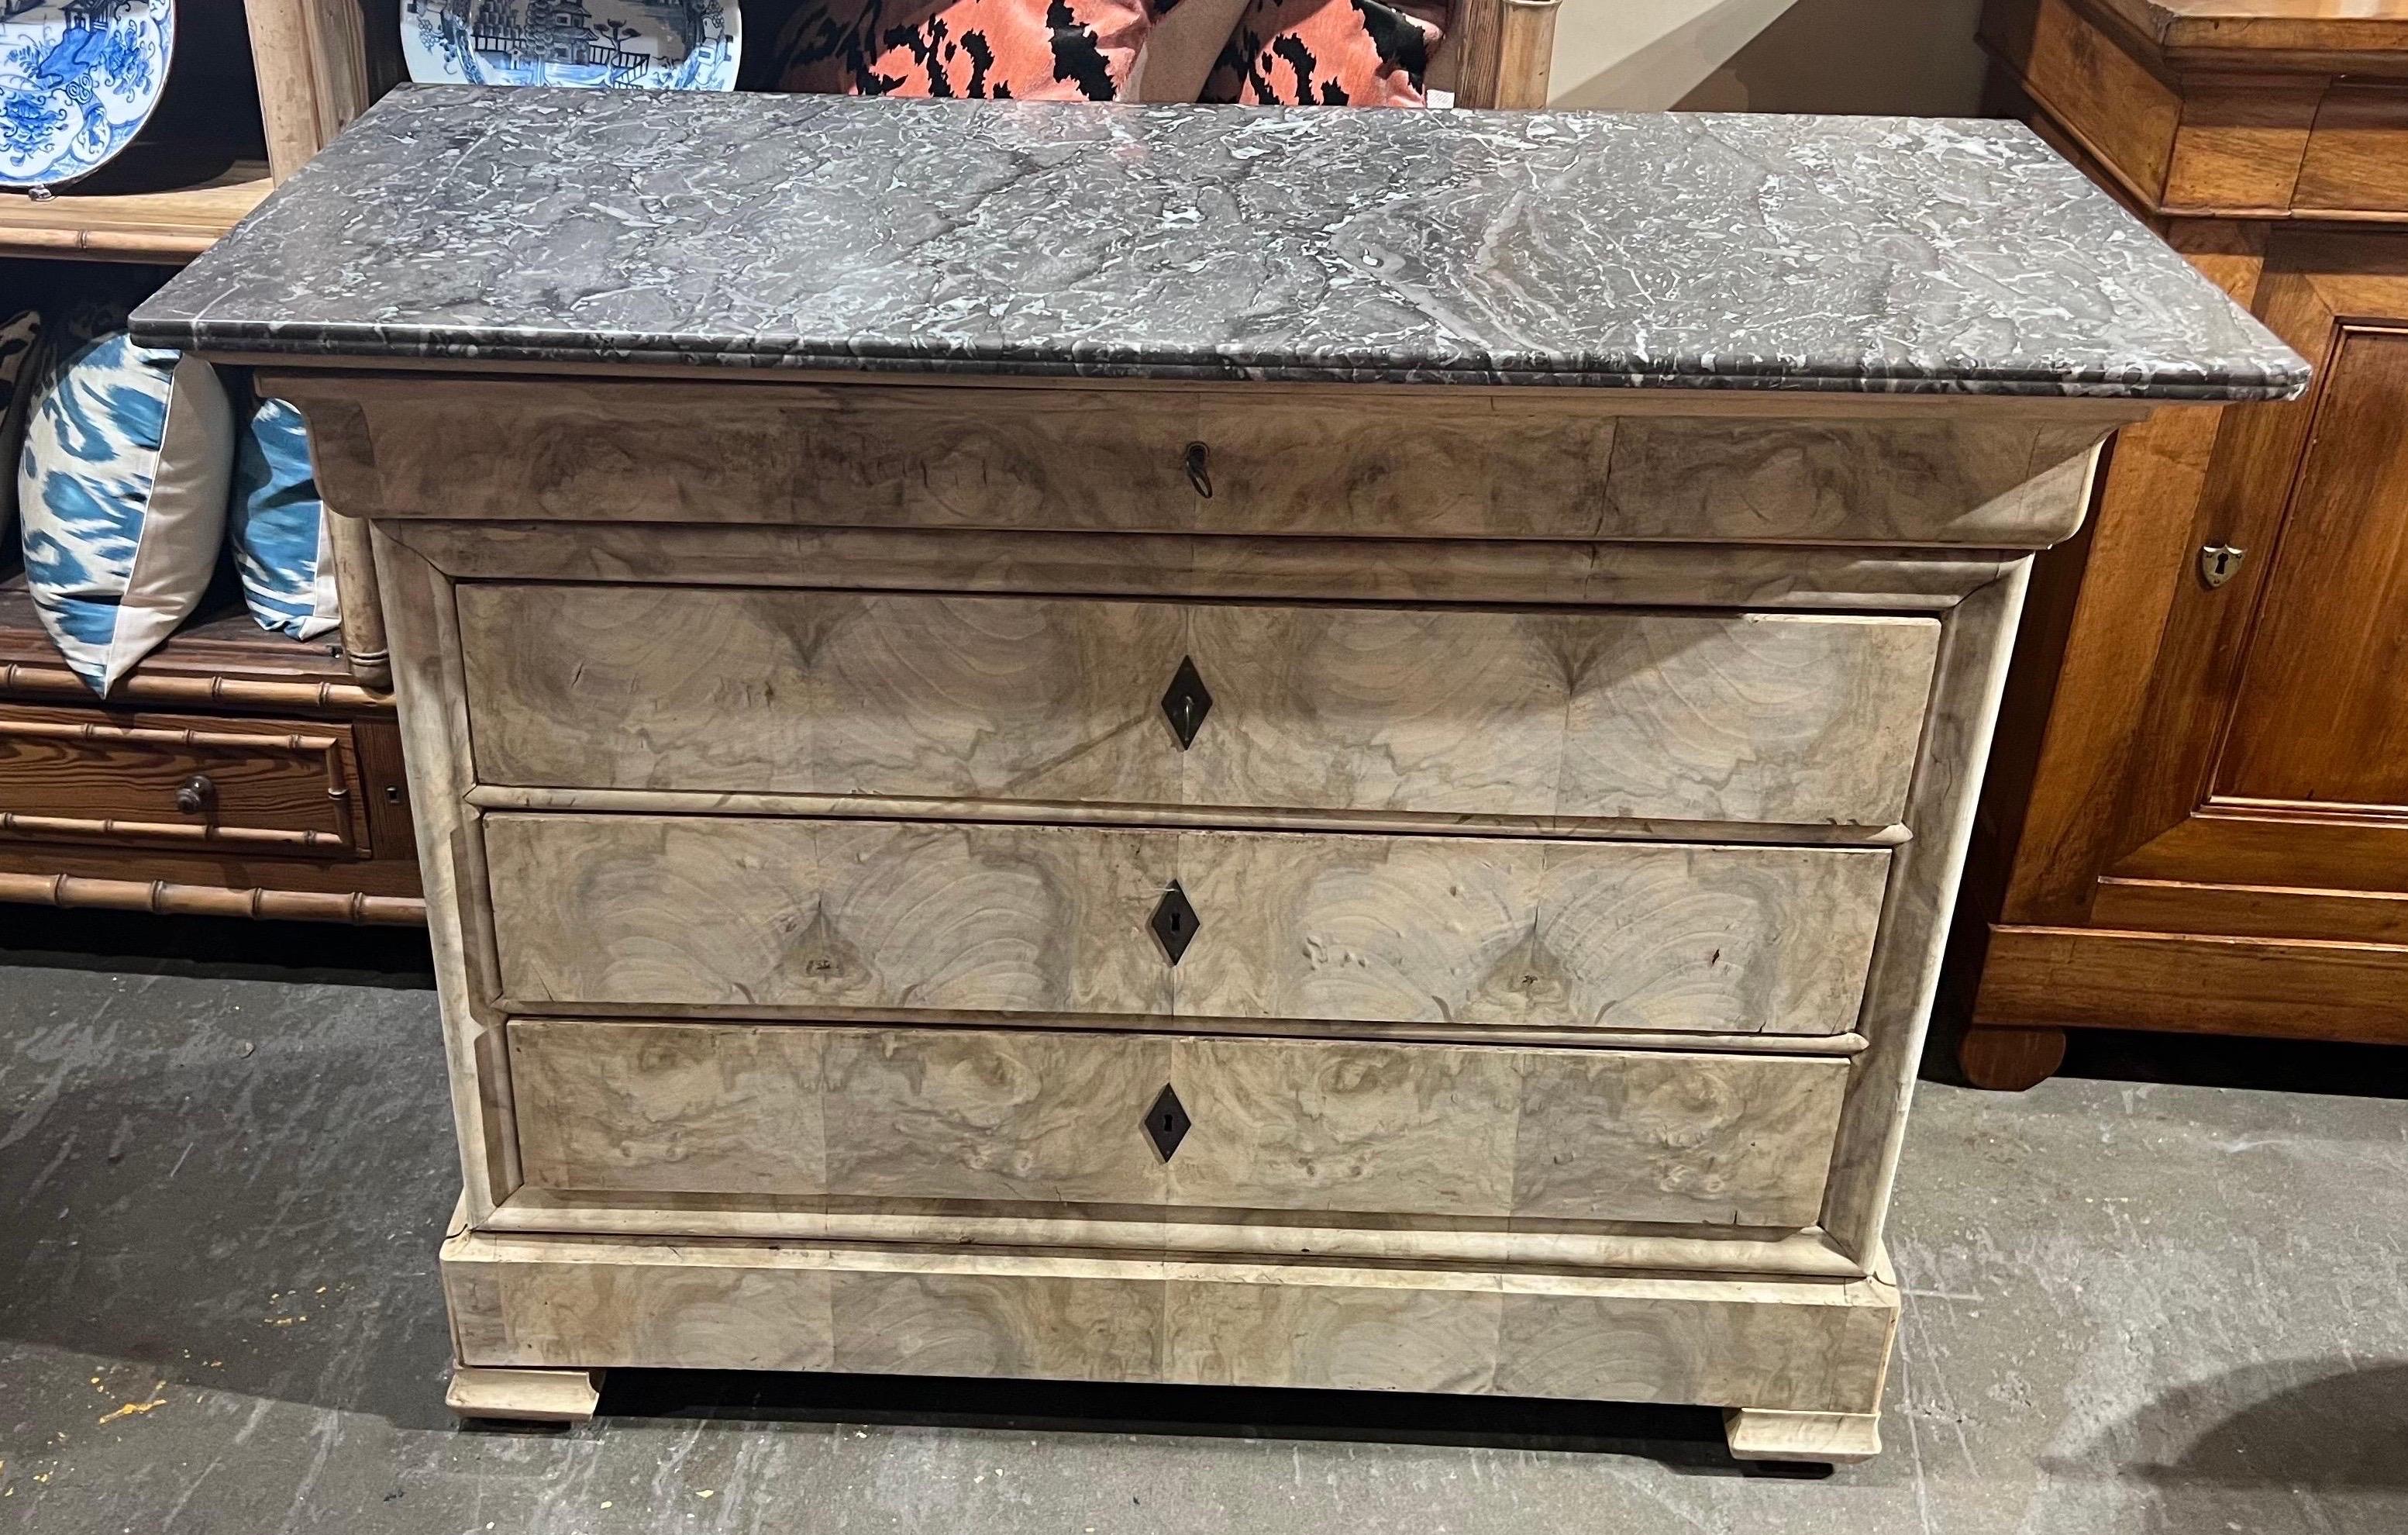 19th century bleached french fossilized marble top chest with hidden bottom drawer and diamond Escutcheons.